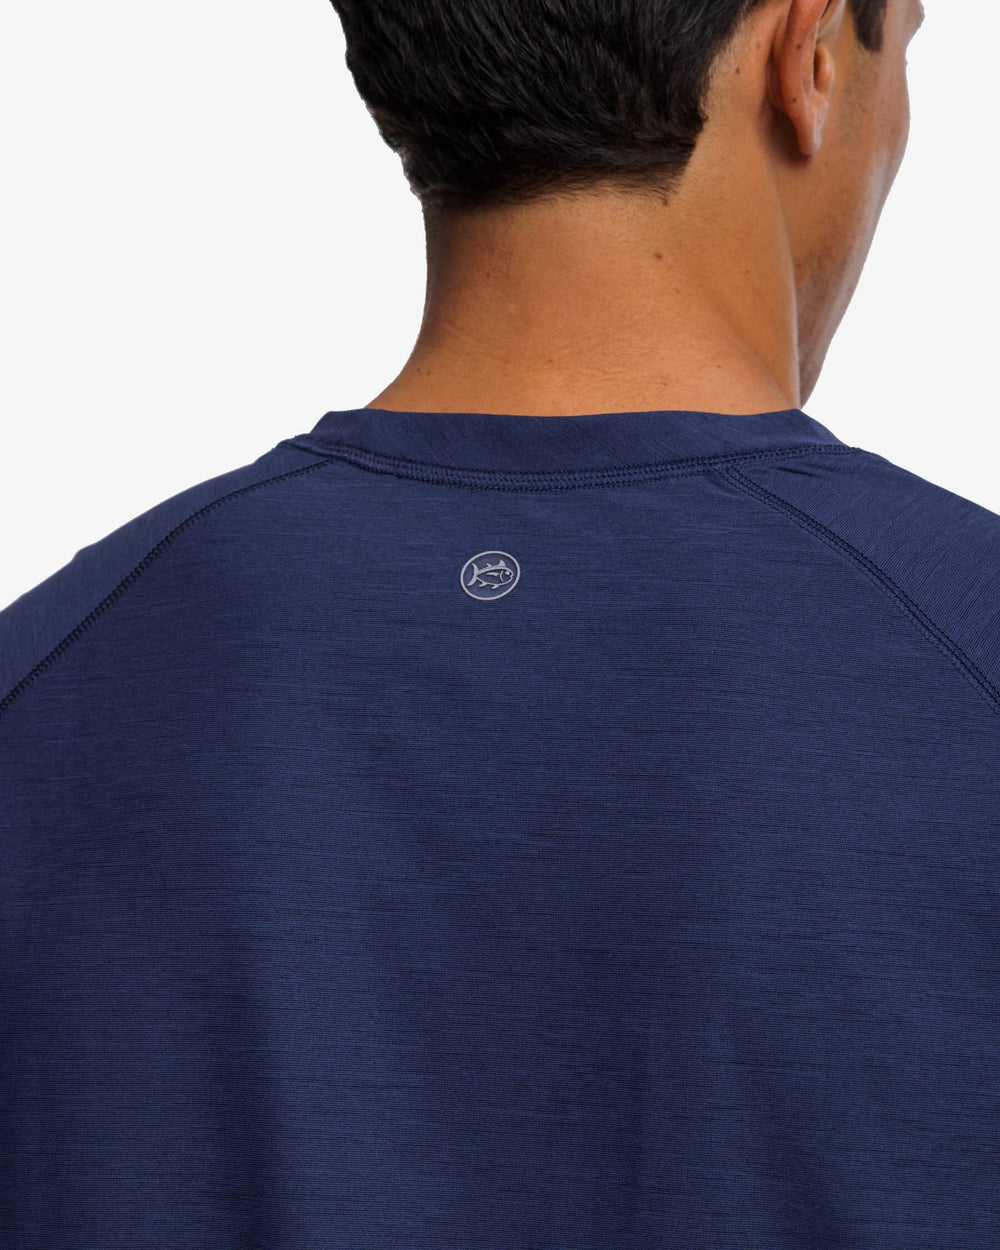 The yoke view of the Southern Tide brrr-illiant Performance Long Sleeve Tee by Southern Tide - Nautical Navy